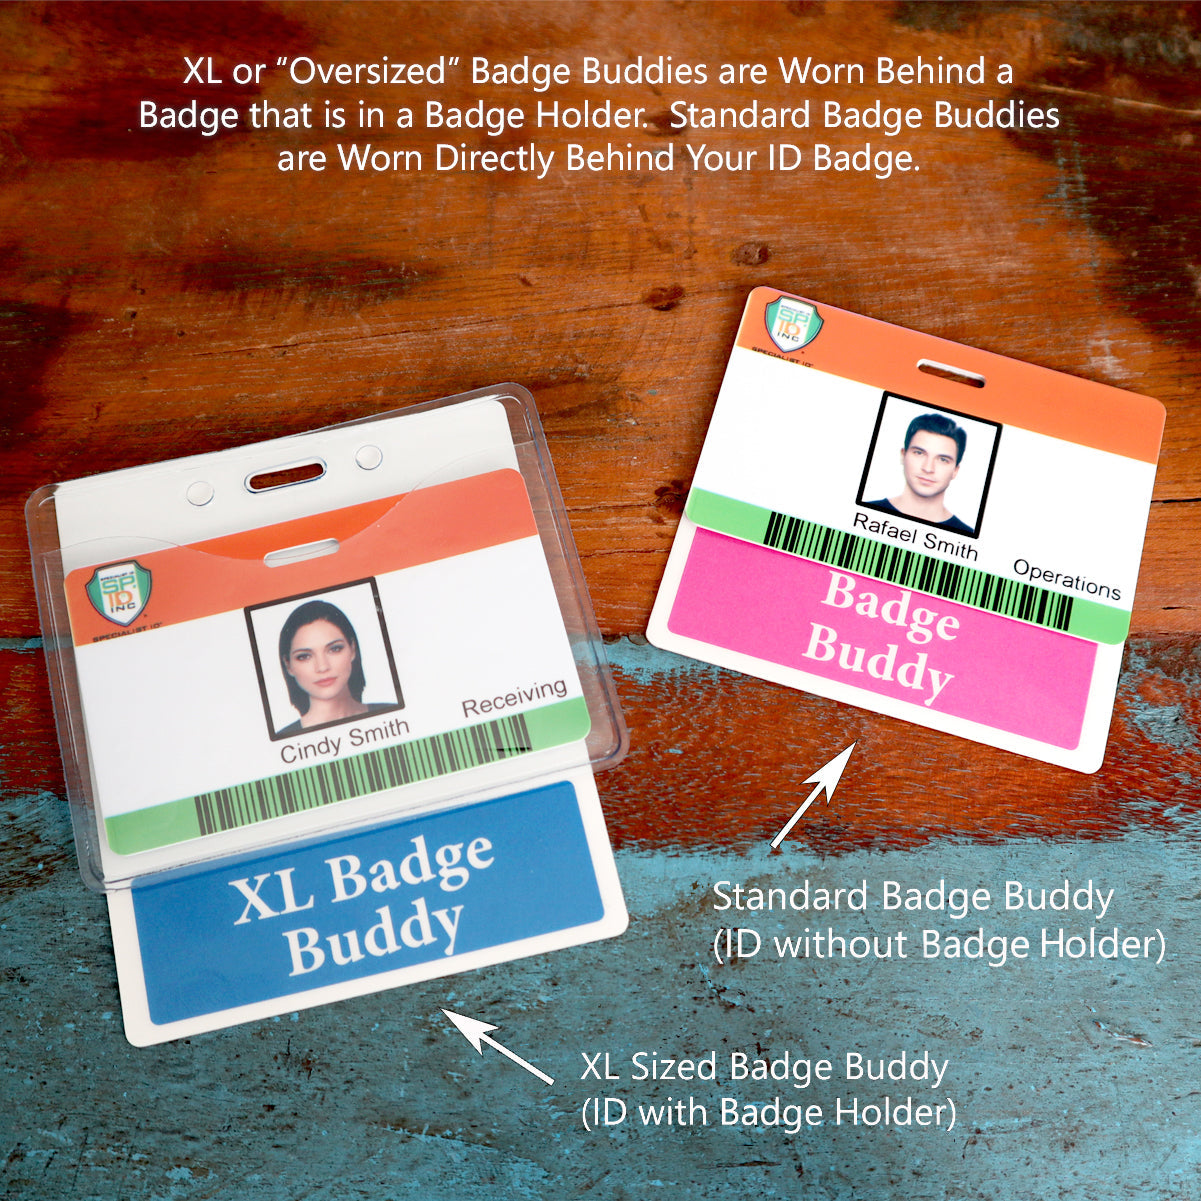 Two ID badges are shown: one labeled "Standard Badge Buddy" and the other "Oversized STUDENT NURSE Badge Buddy - XL Badge Backer for Student Nurses - Horizontal Hospital ID Badge Buddies." The Oversized STUDENT NURSE badge, with its durable design, is worn behind an ID badge in a holder, while the standard badge is behind a loose ID badge. Ideal for a clinical environment, ensuring clear identification.